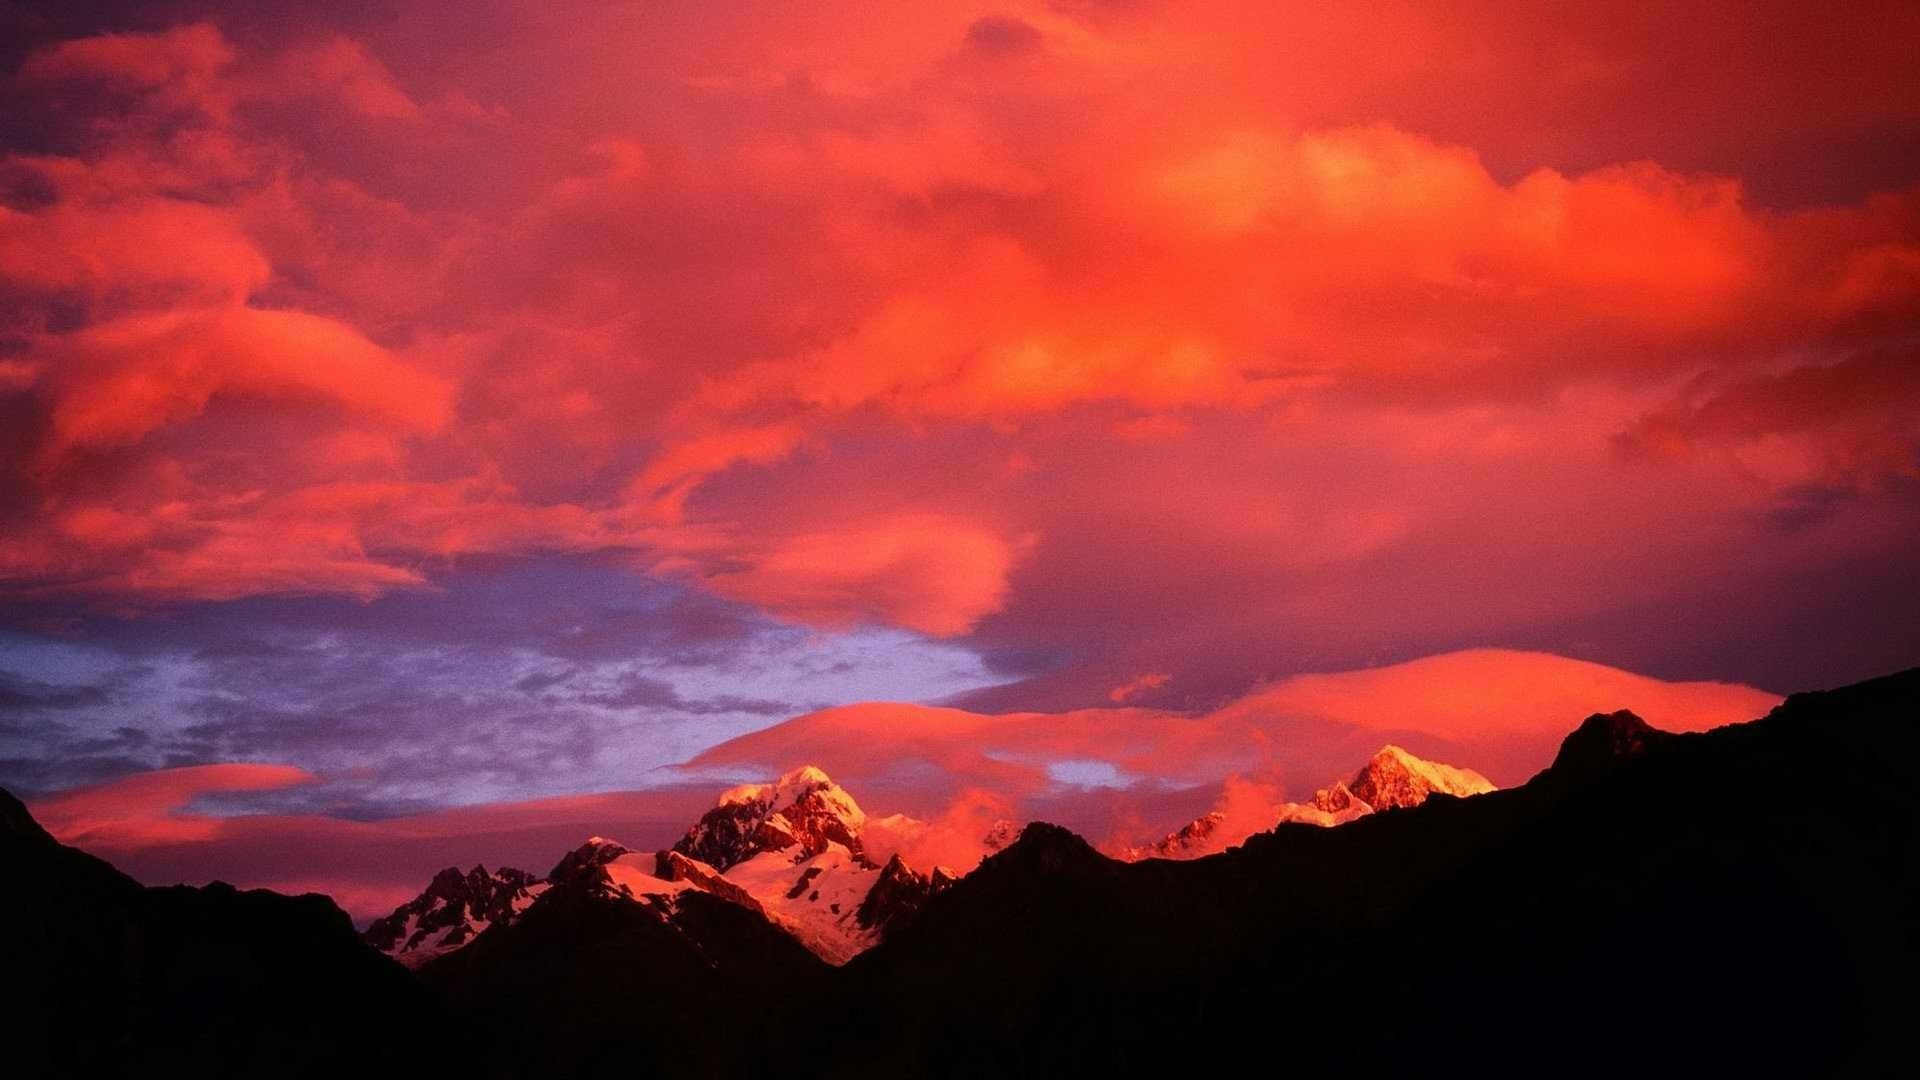 Clouds and Sunset over Mountains HD Wallpaper | Background Image